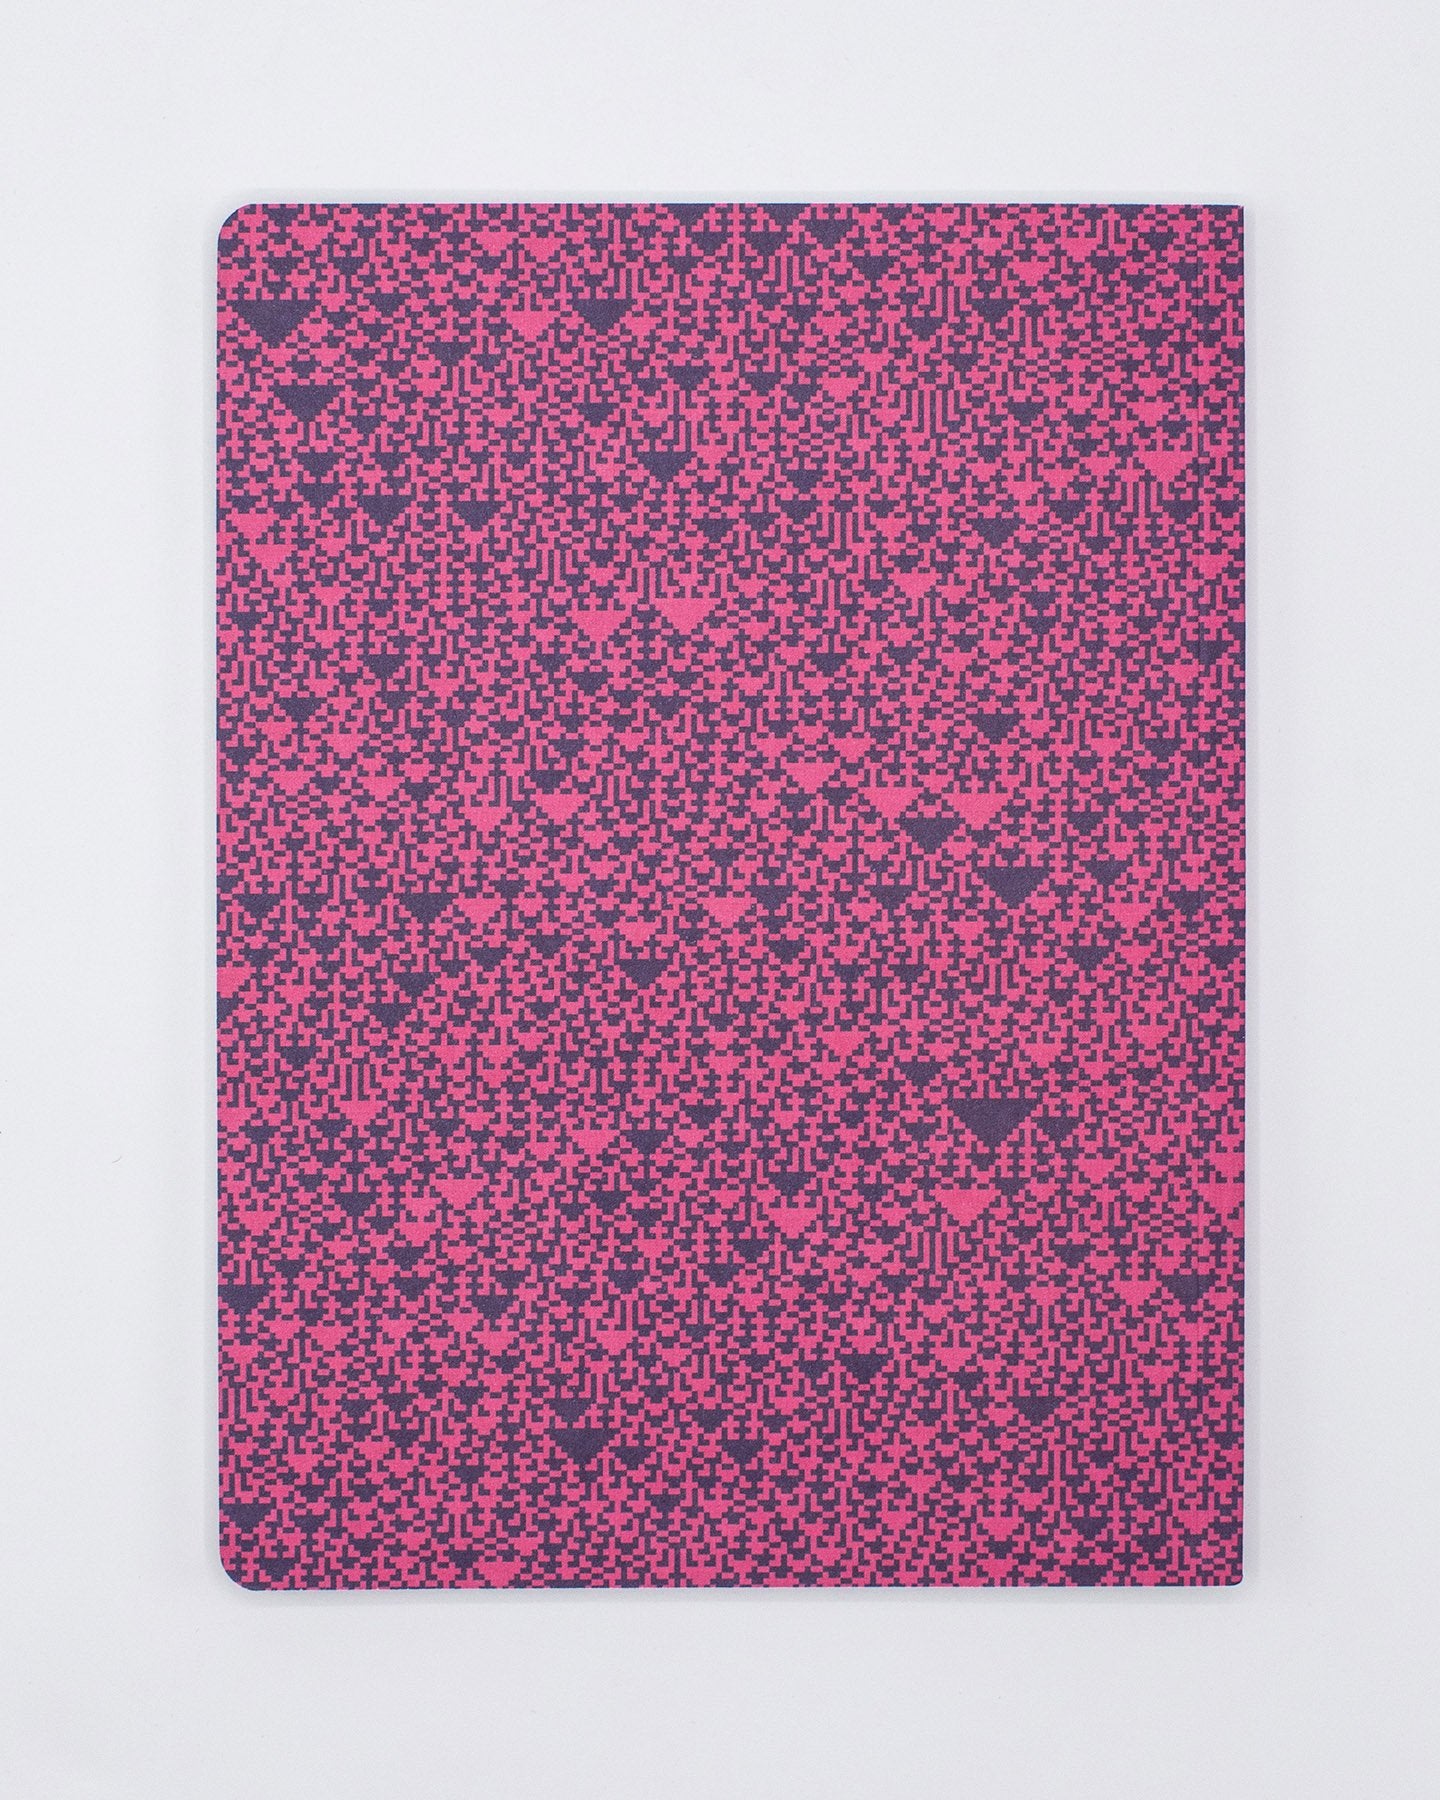 Cellular Automaton Softcover Notebook - Dot Grid